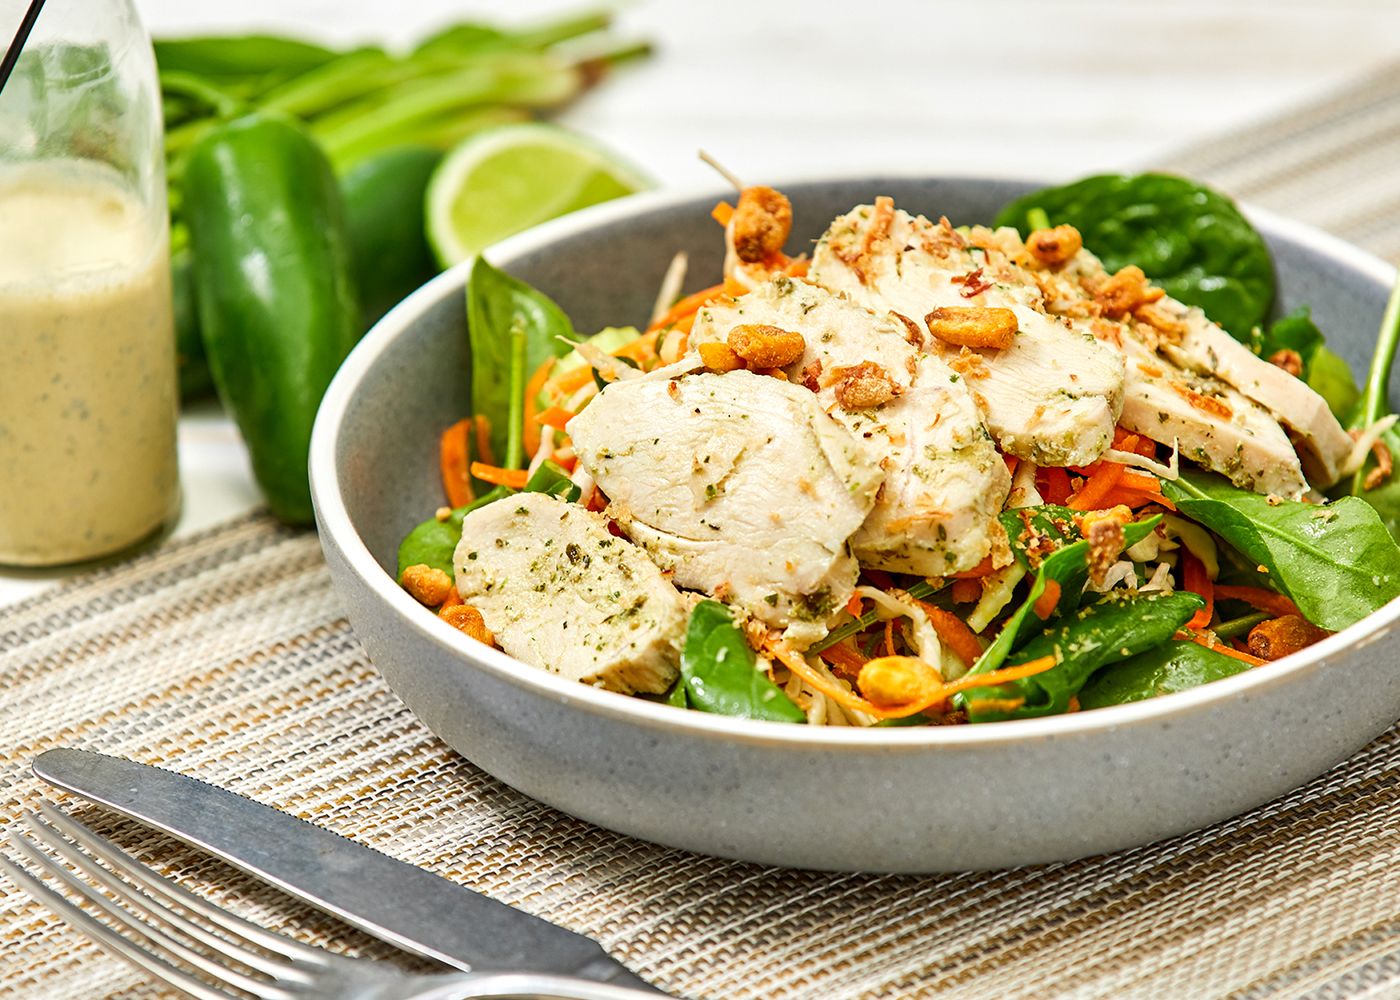 Jalapeno + herb chicken salad - Add Your Own Salad Greens